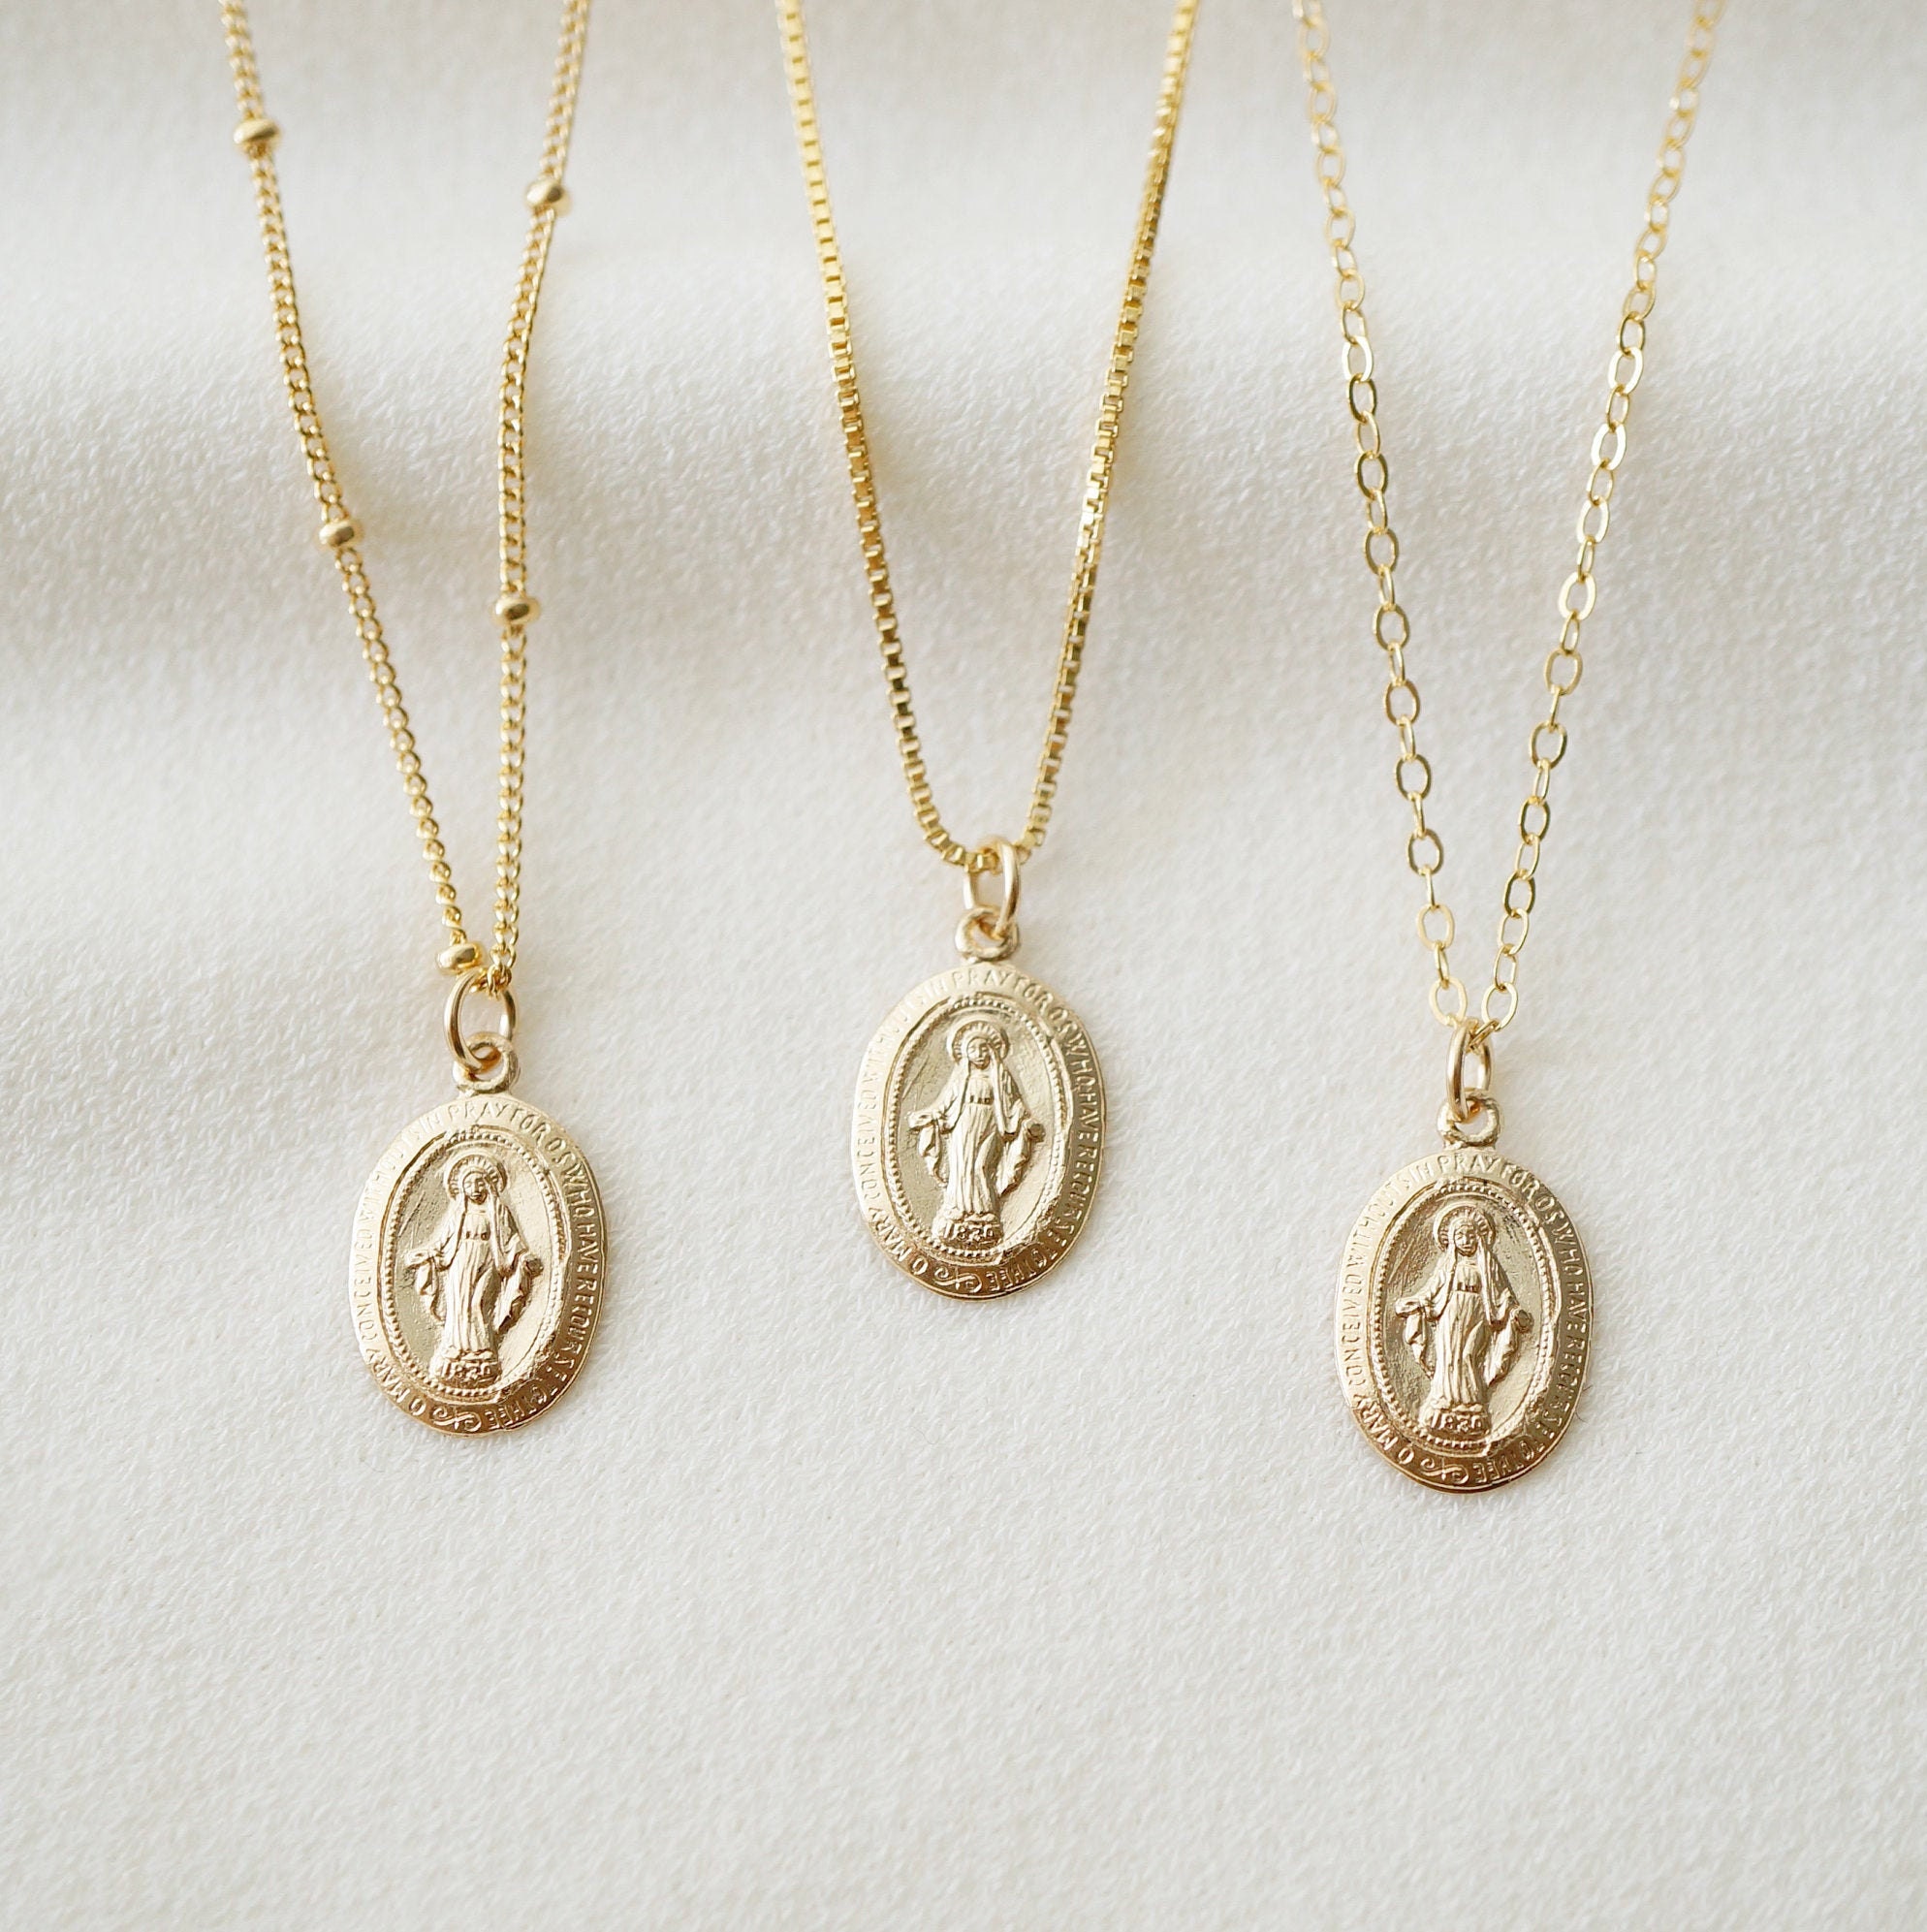 14 K Gold filled Virgin Mary Charm, Tiny 14 20 Gold Miraculous Madonna  Bracelet Charms #2157, Minimalist Rosary Chain Necklace - 1 Pc Small Round